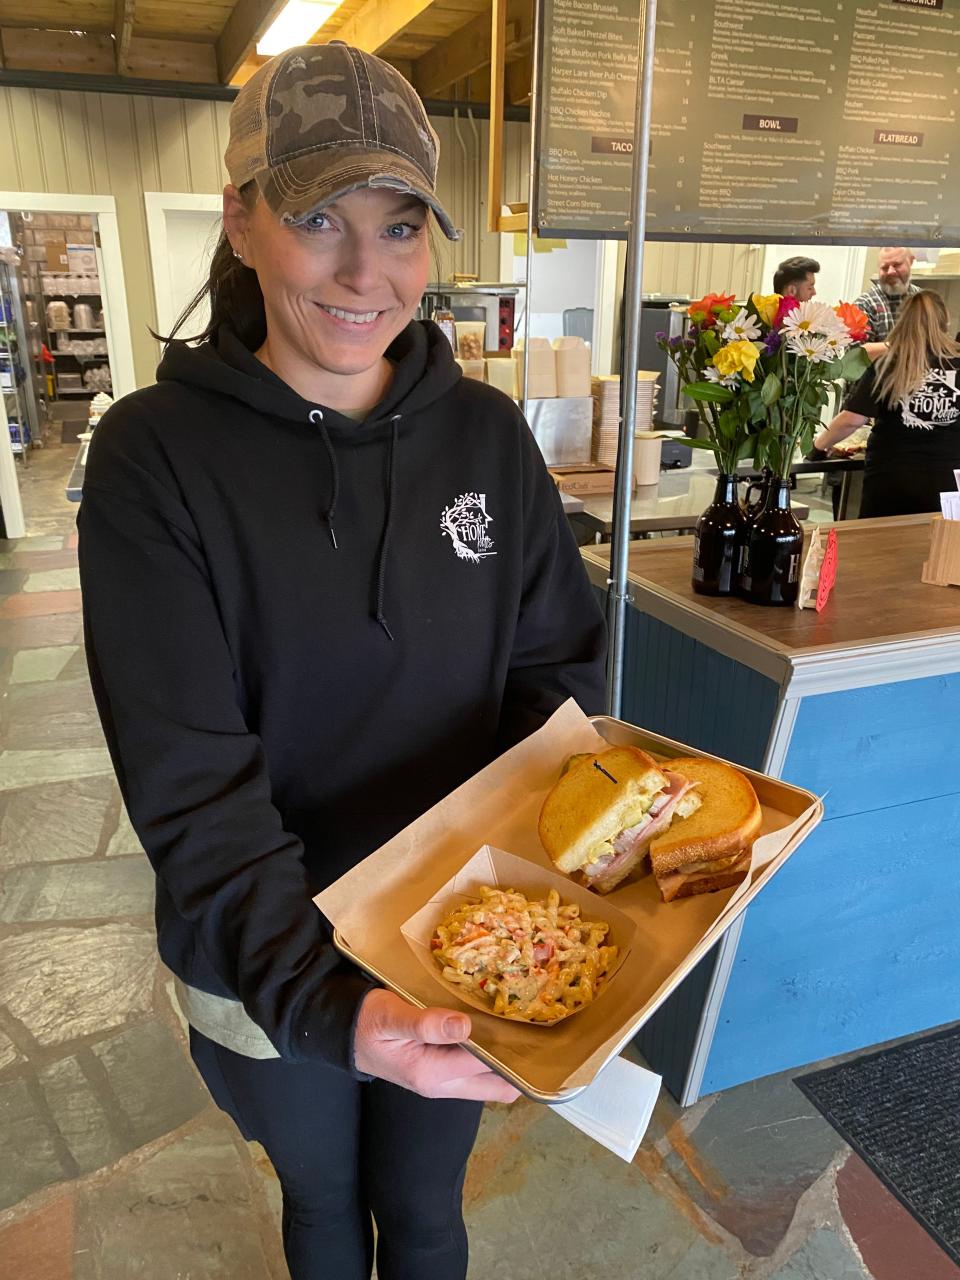 Ellen Trott, wife of owner Andy Trott, as well as co-owner, serving a pork belly cuban sandwich with homemade pasta salad on the side. Photo taken January 27, 2024 at lunchtime.